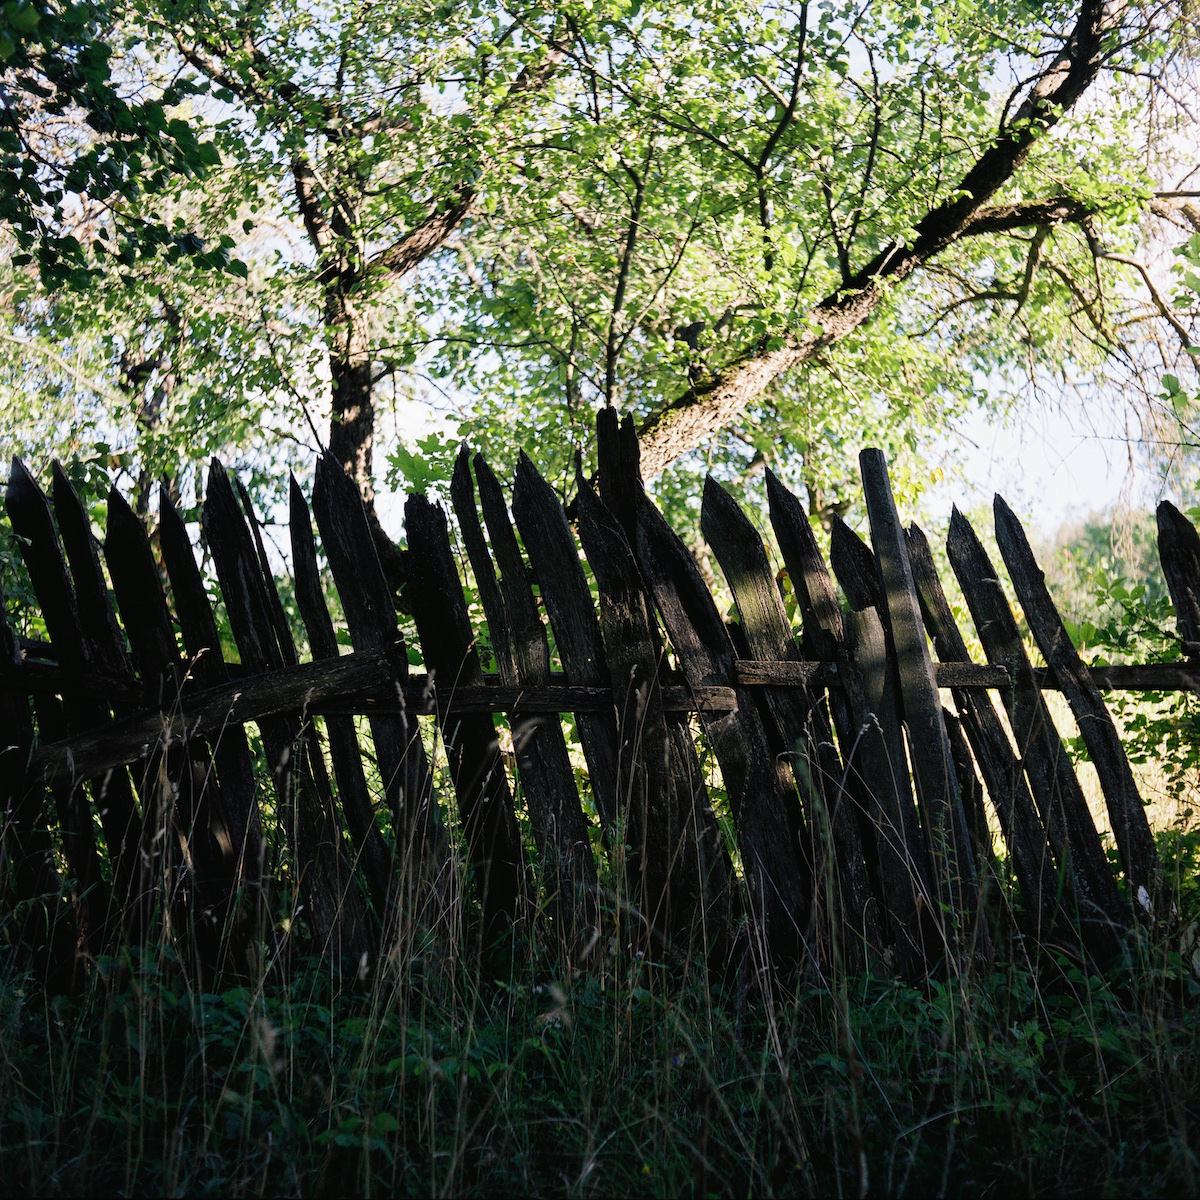 A typical fence in Chekalin